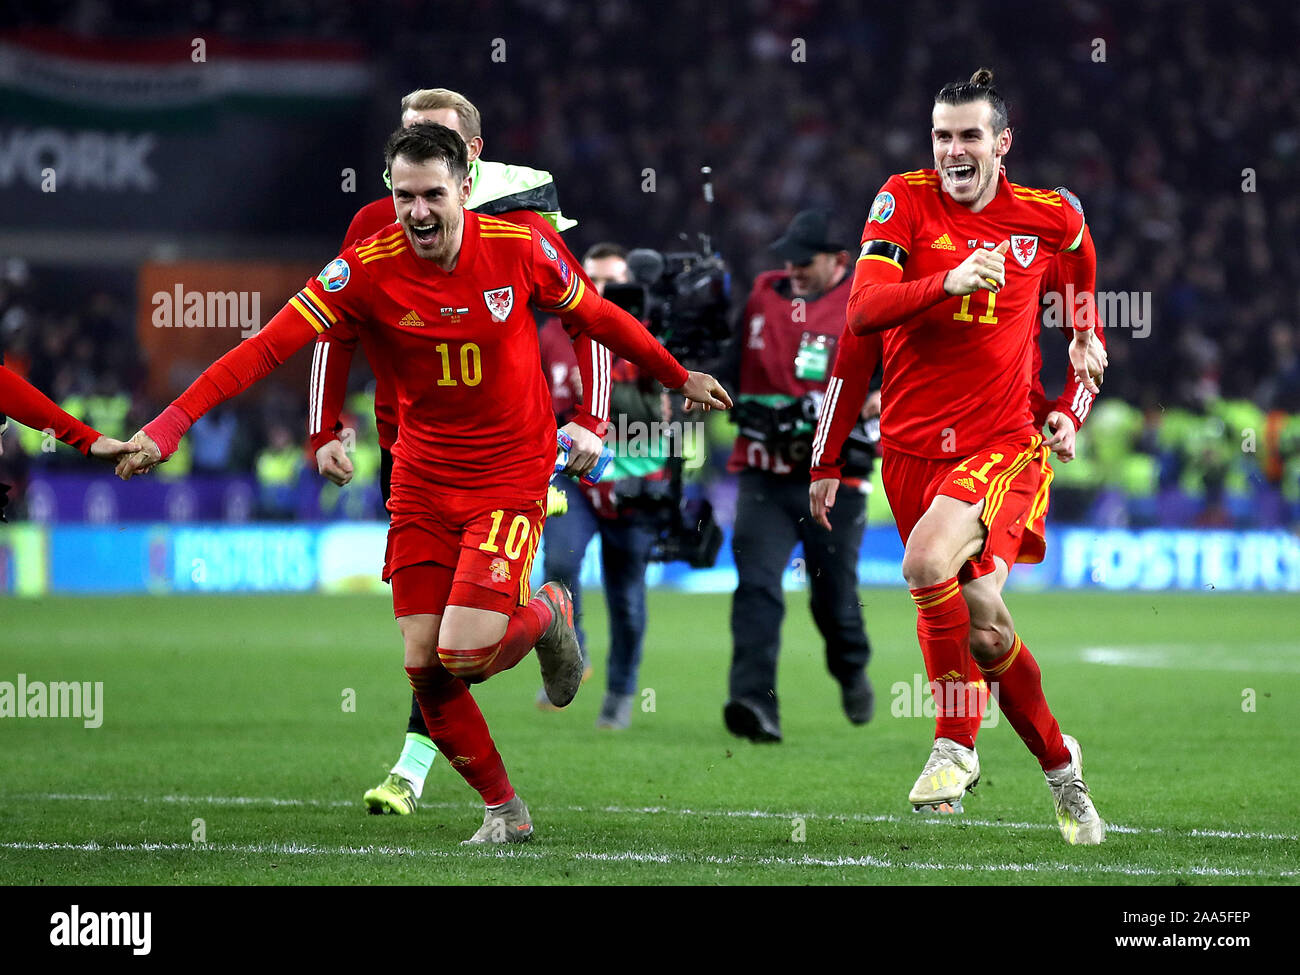 Wales' Aaron Ramsey (left) and Gareth Bale (right) celebrate victory an qualification after the final whistle during the UEFA Euro 2020 Qualifying match at the Cardiff City Stadium. Stock Photo